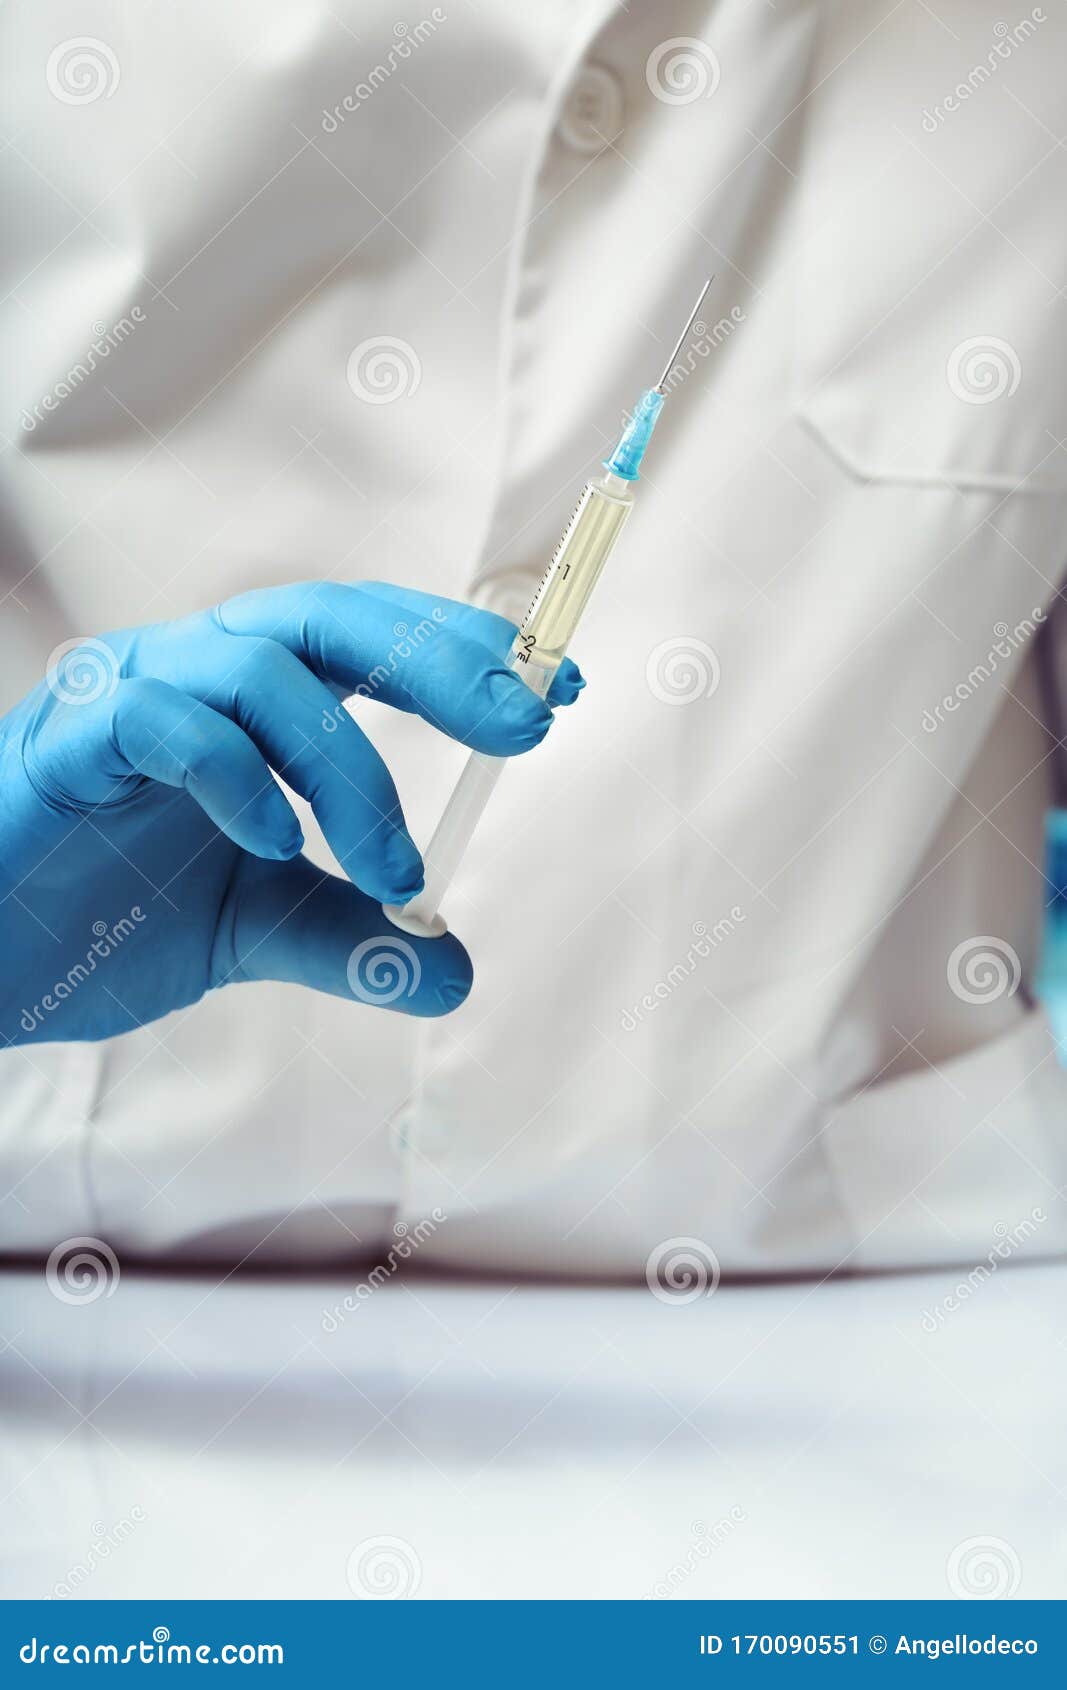 doctor holding a subcutaneous vaccine of preventive medicine in the medical office